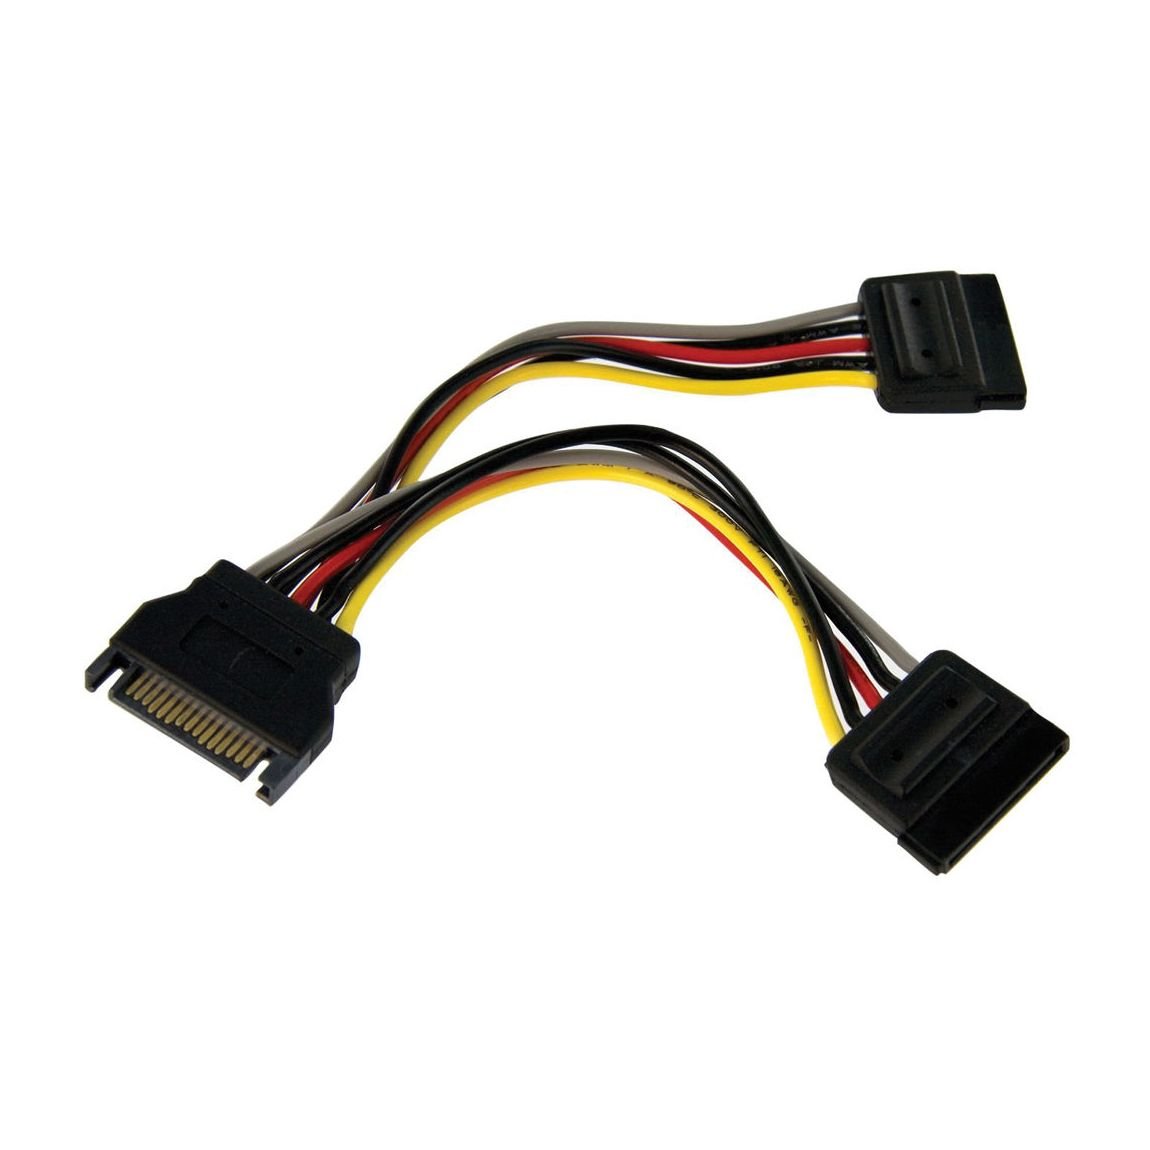 8Ware SATA Power Splitter Cable 15cm 1 x 15-pin - 2 x 15-pin Male to Female - I Gaming Computer | Australia Wide Shipping | Buy now, Pay Later with Afterpay, Klarna, Zip, Latitude & Paypal